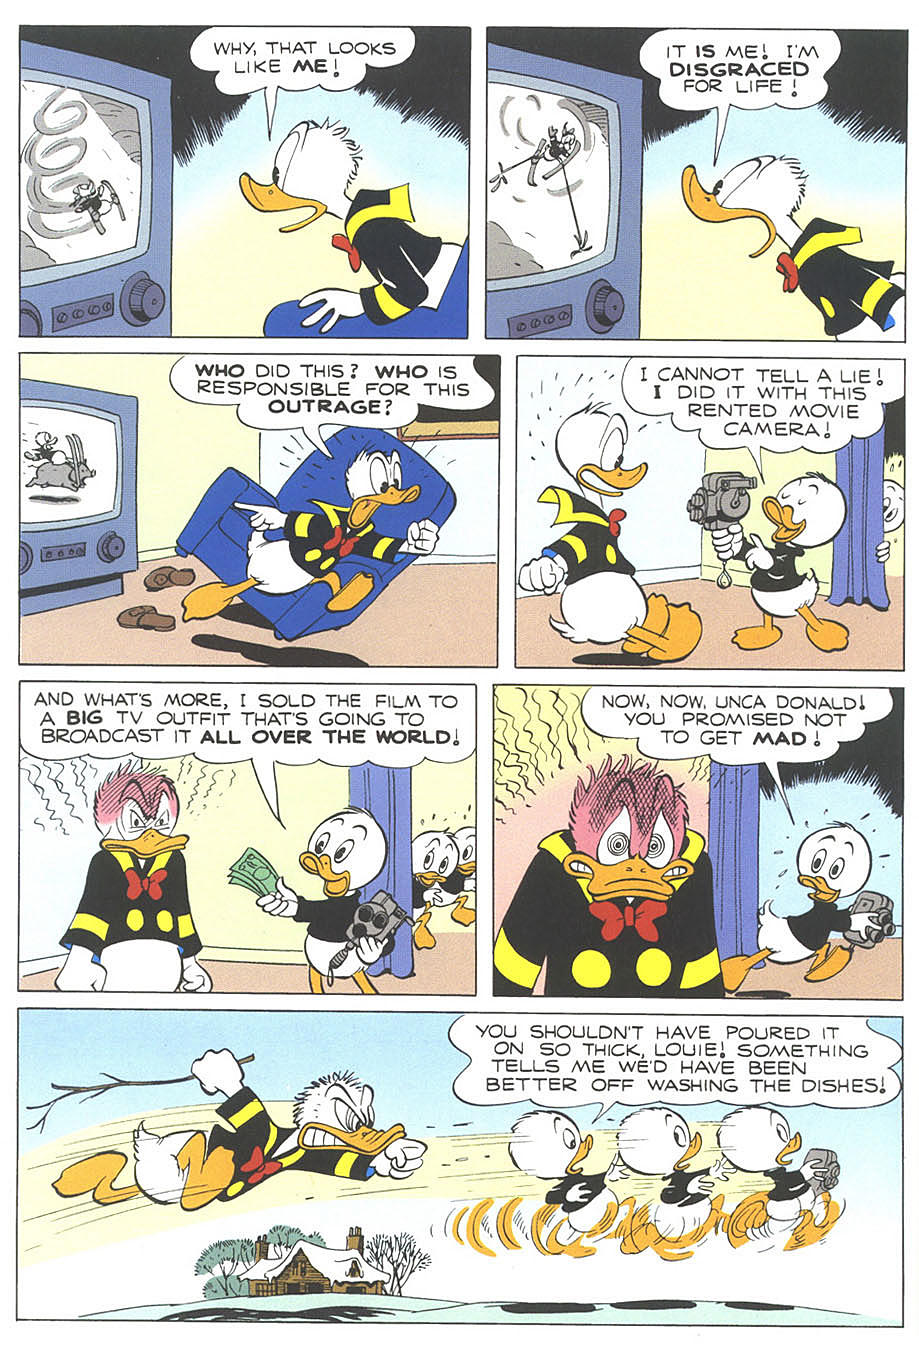 Celebrating The Work And Legacy of Carl Barks, The Good Artist